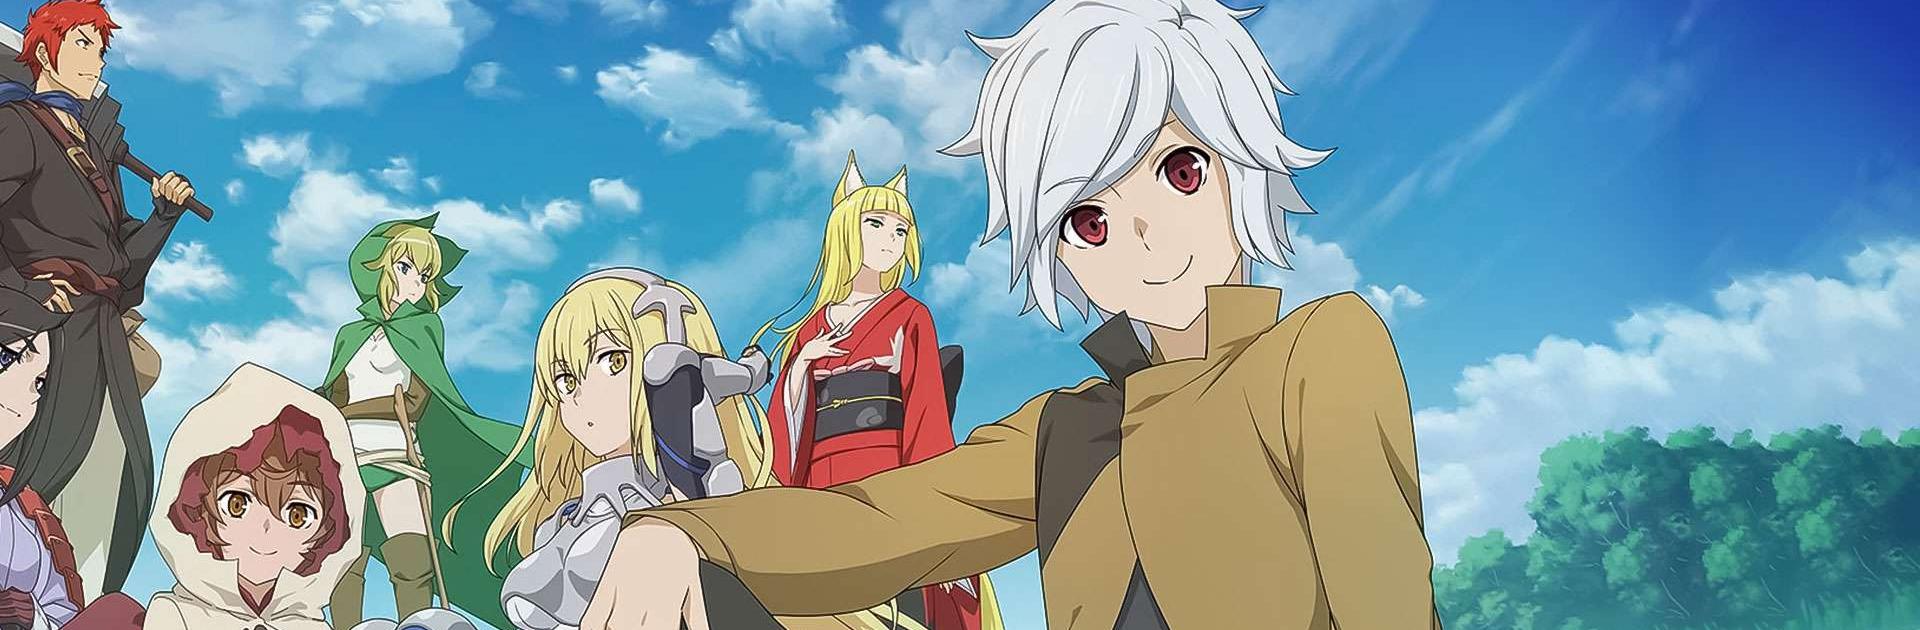 DanMachi BATTLE CHRONICLE – Tier List for the Best Characters